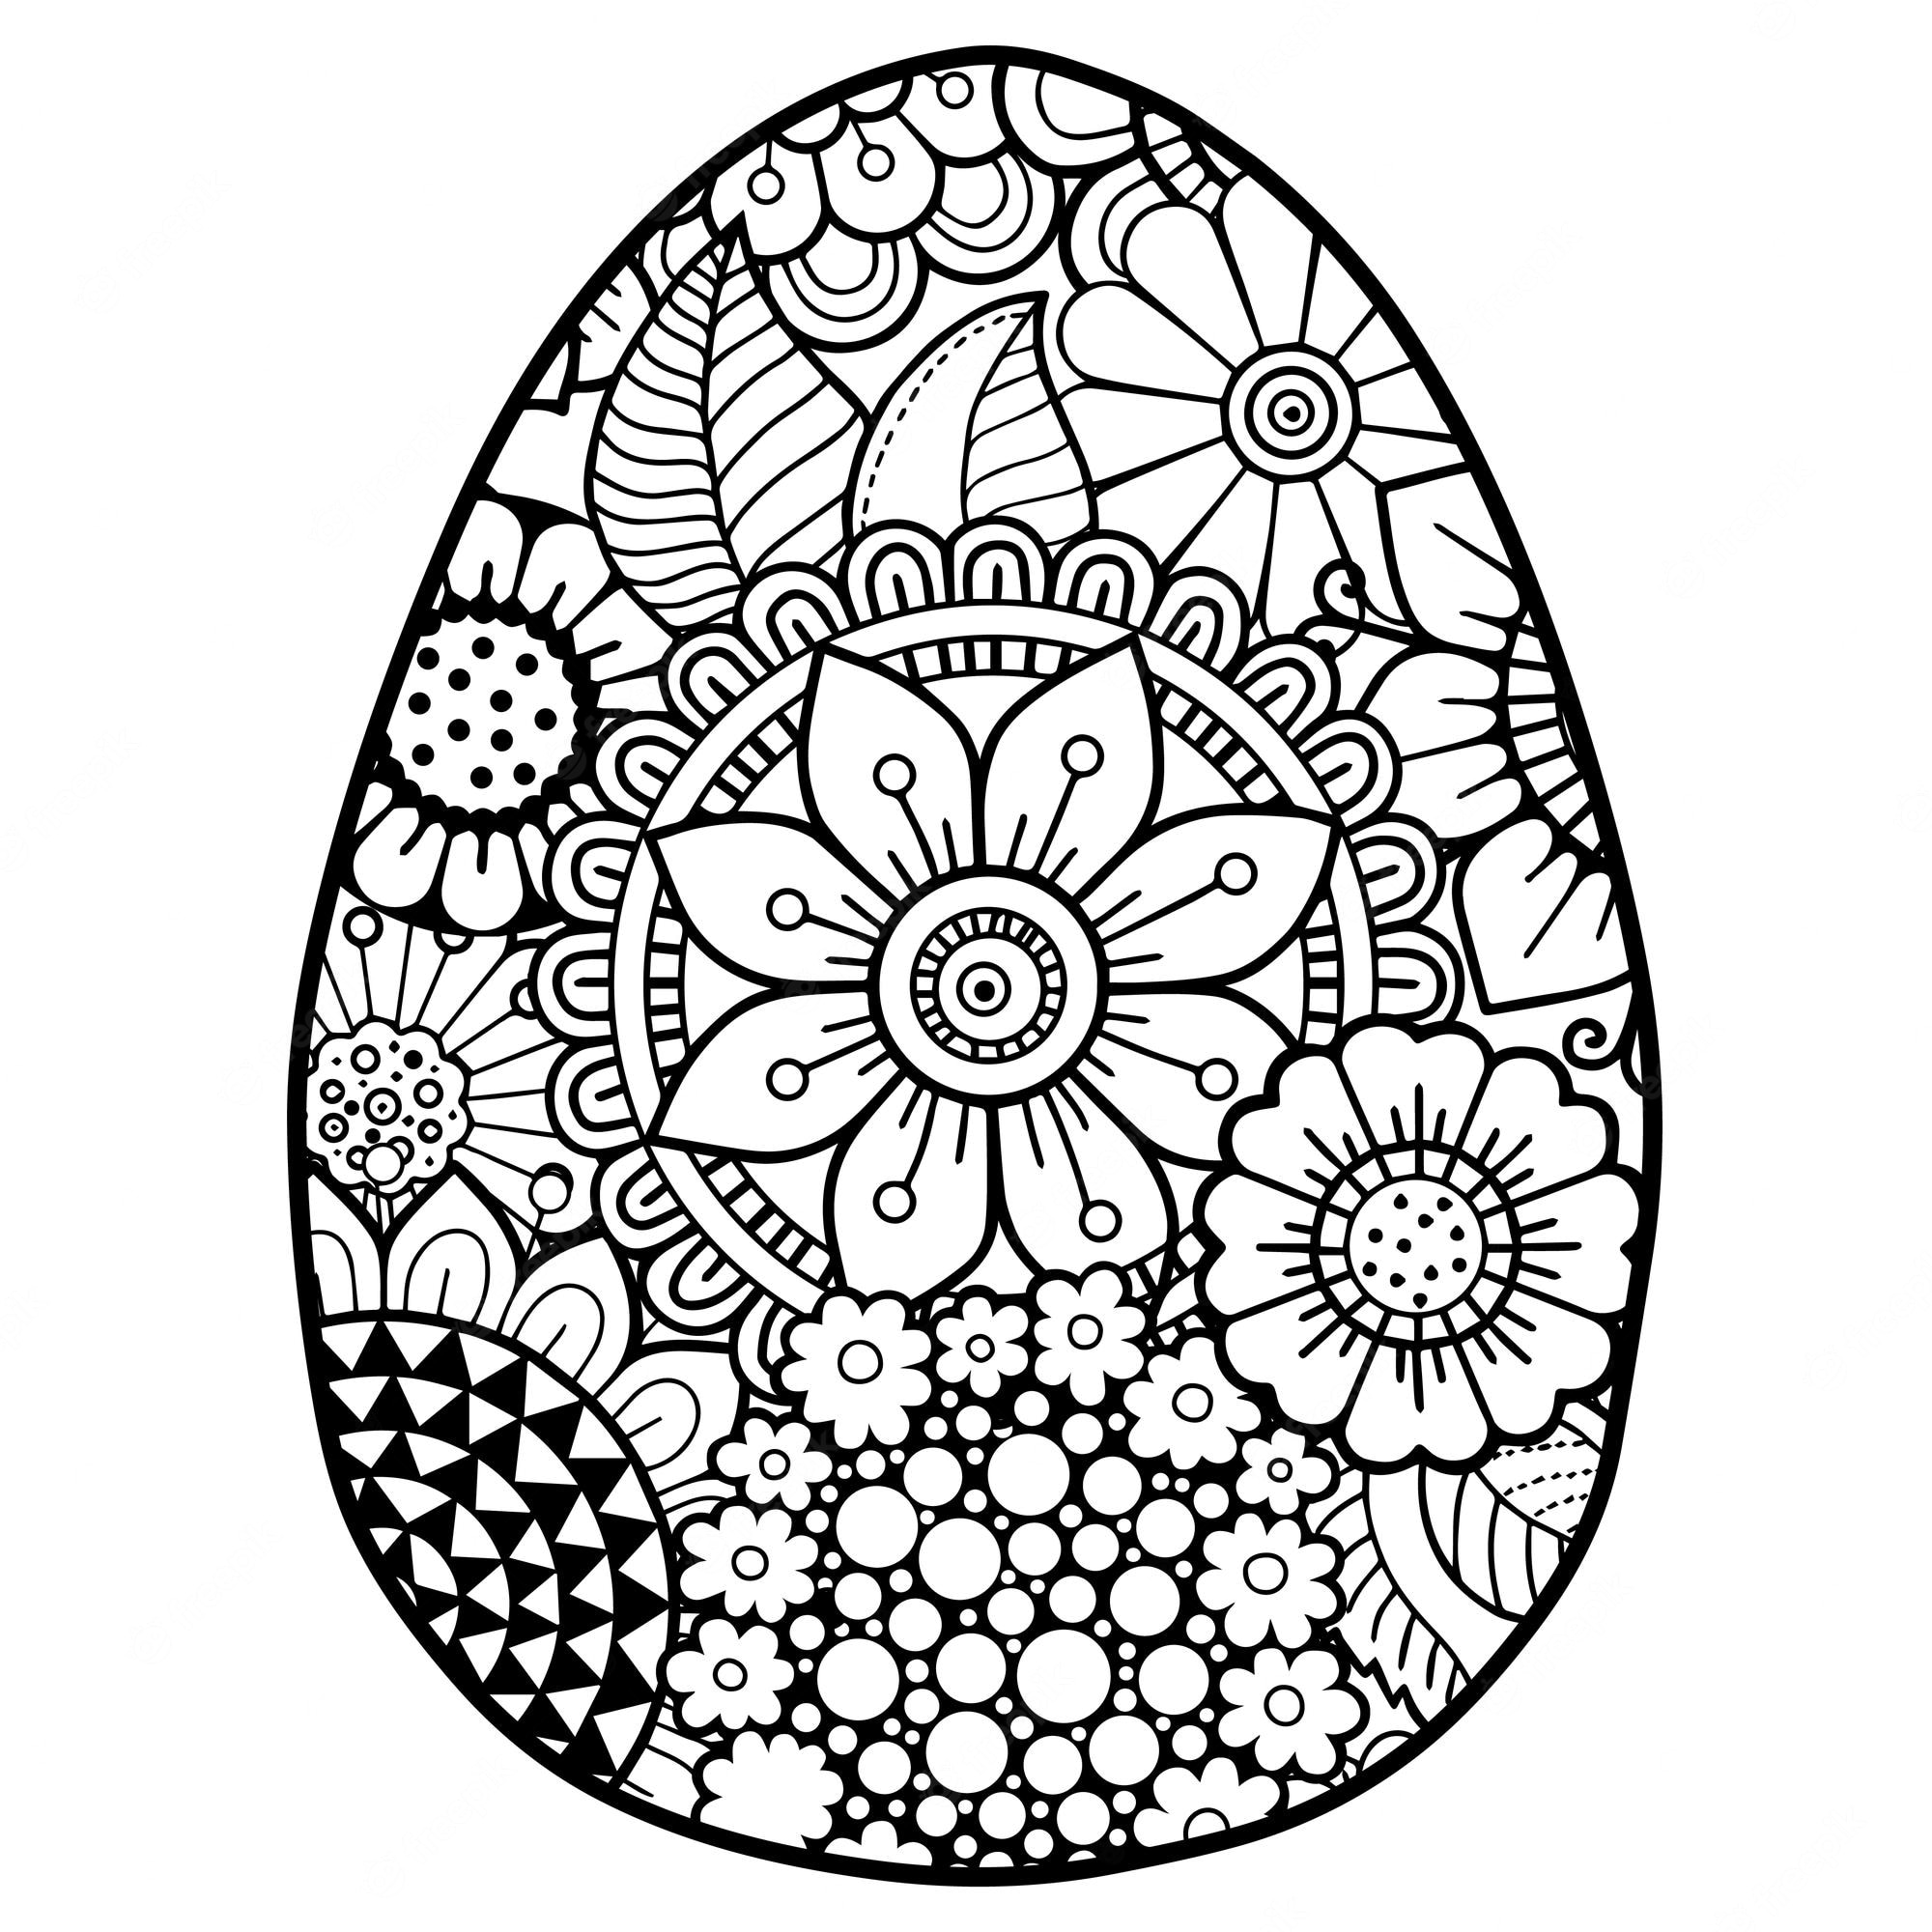 Premium Vector | Vector doodle coloring book page or adult. easter egg in  mandala style. detailed black contour flowers pattern on white background